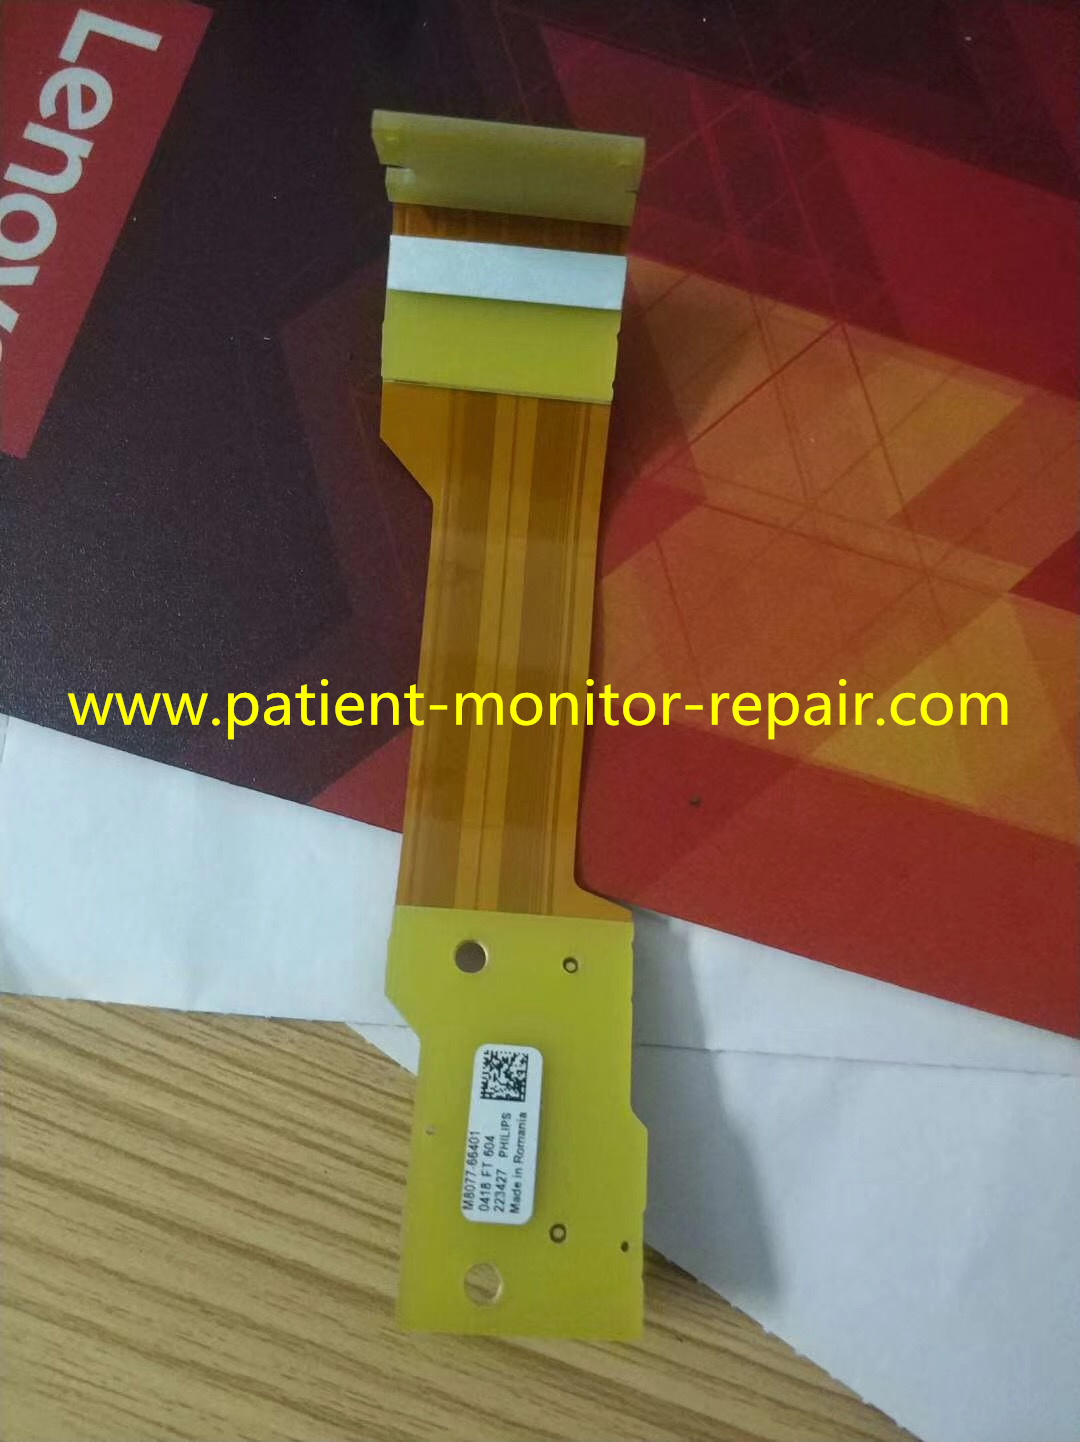 PHILIPS IntelliVue MP30 patient monitor display cable price|Used|Refurbish|M8077-66401